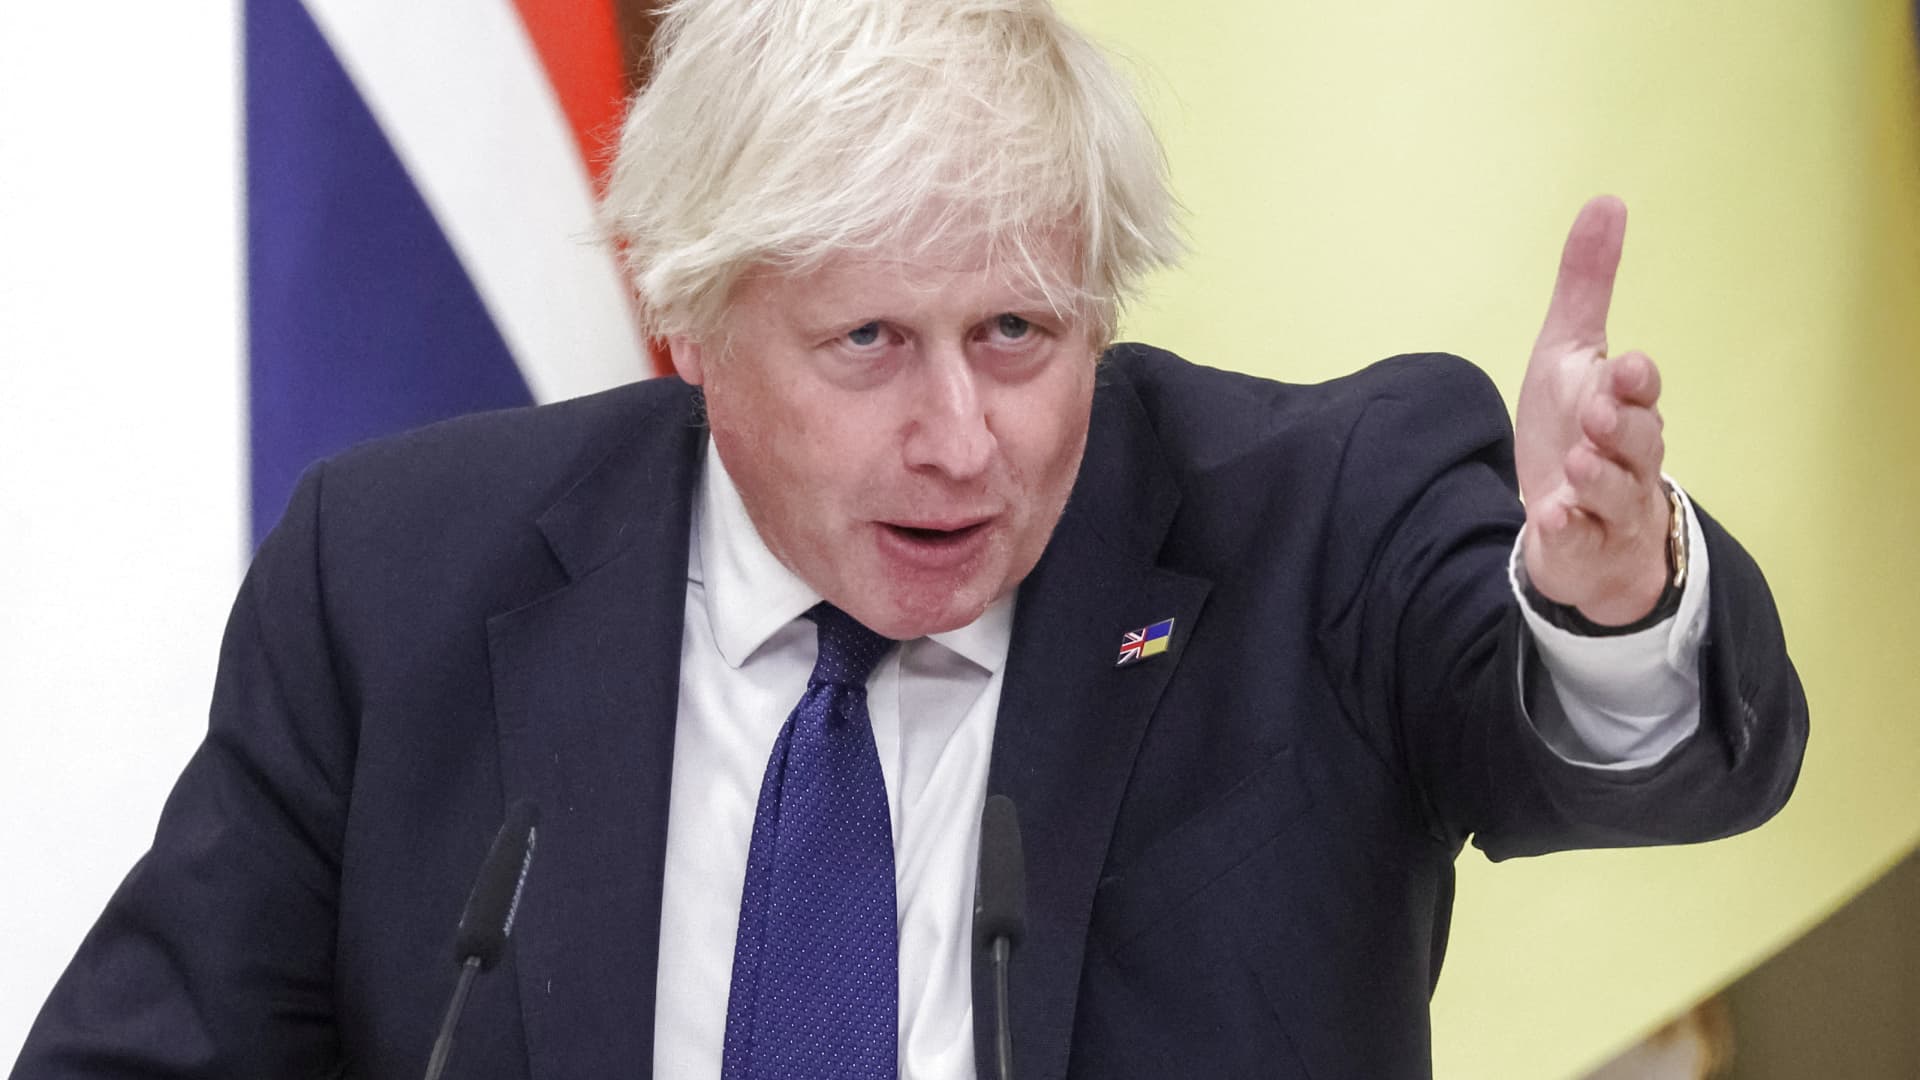 Former UK PM Boris Johnson pulls out of leadership race to replace Liz Truss